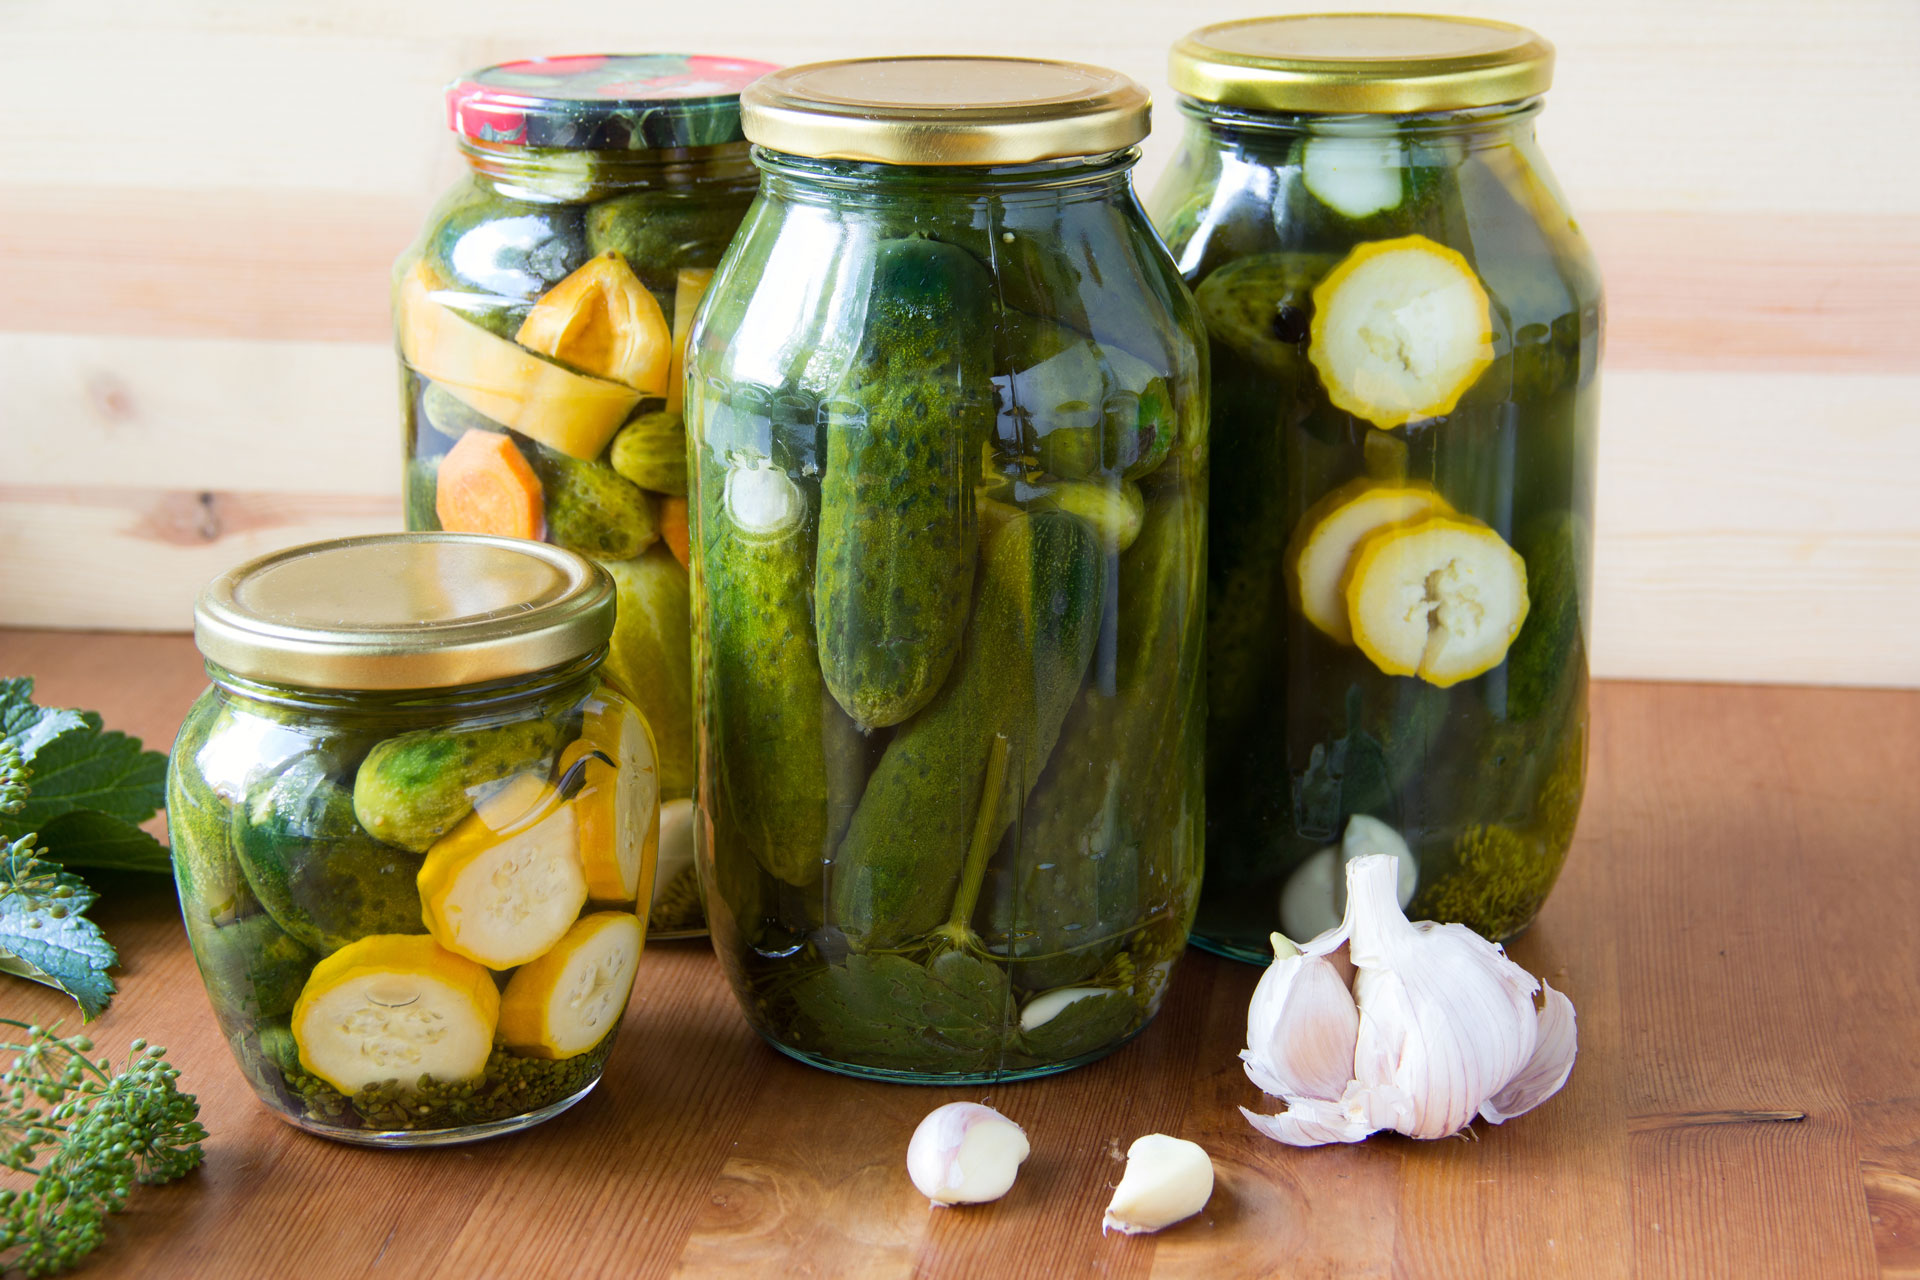 Preserved cucumbers and other vegetables in glass jars.